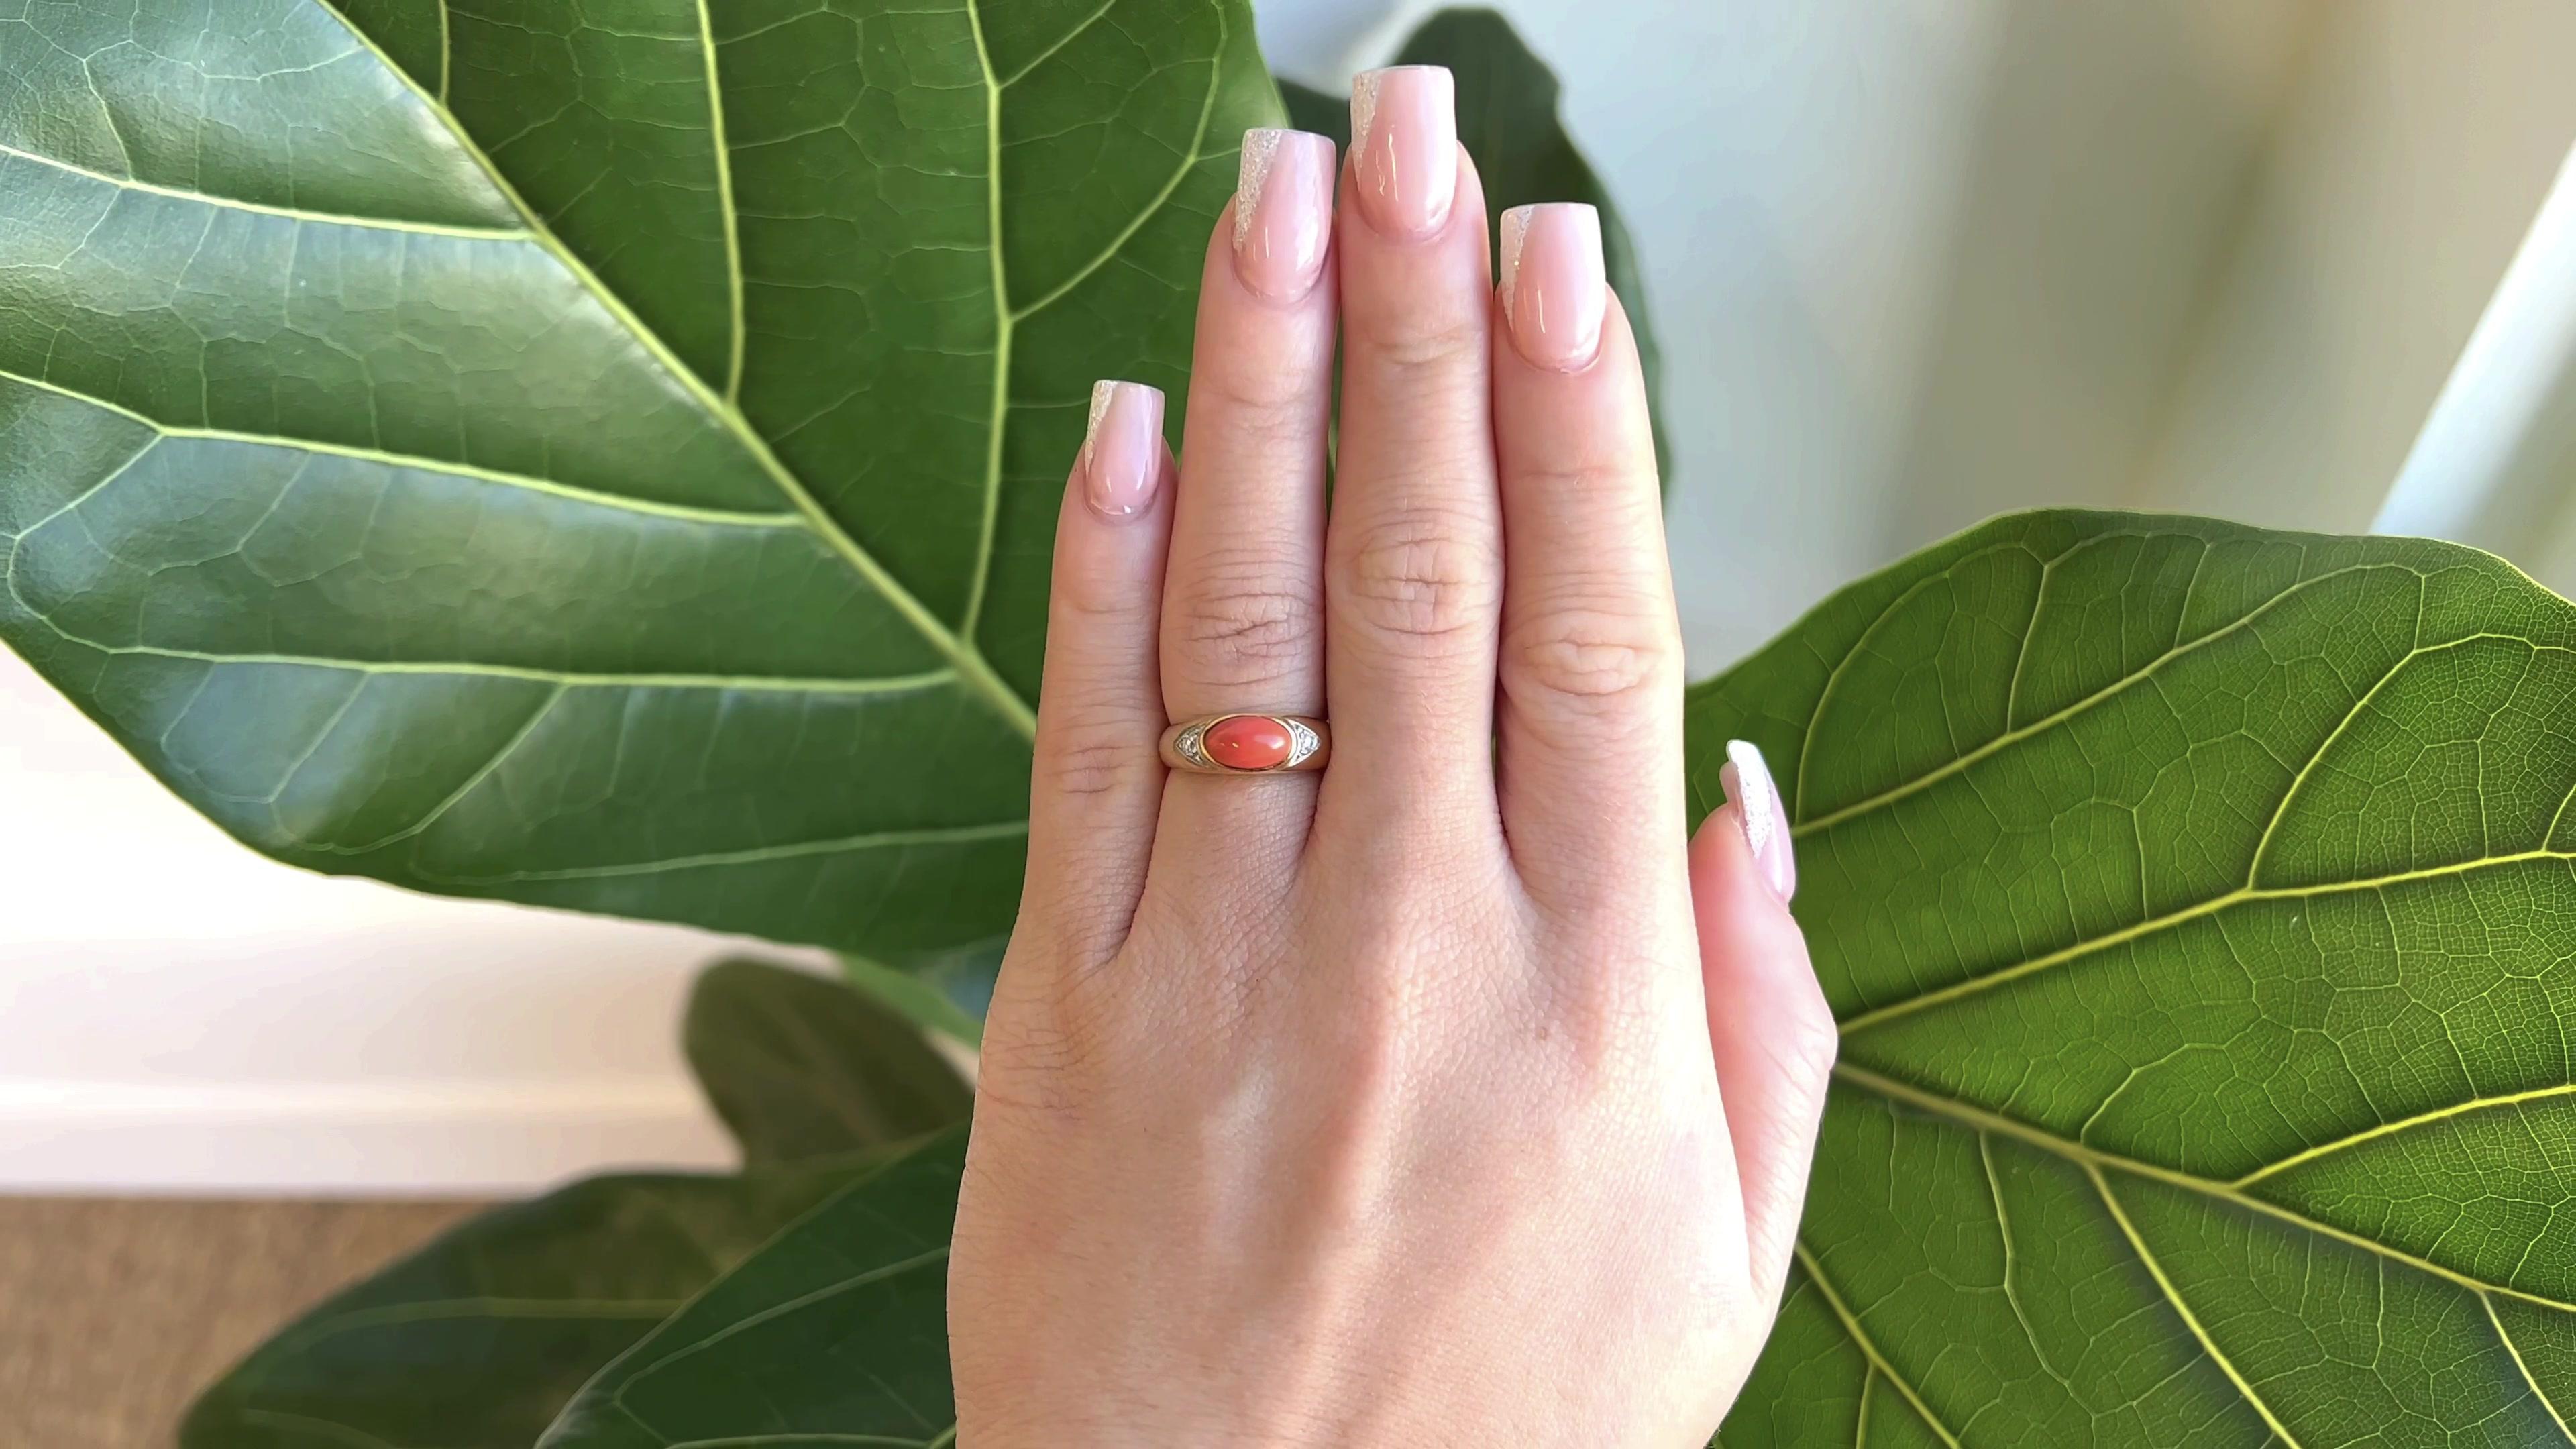 One Vintage Van Cleef & Arpels Coral Diamond 18 Karat Gold Ring. Featuring one cabochon cut coral of approximately 1.90 carats. Accented by two round brilliant cut diamonds graded D-E color, VVS clarity. Crafted in 18 karat yellow gold with diamonds